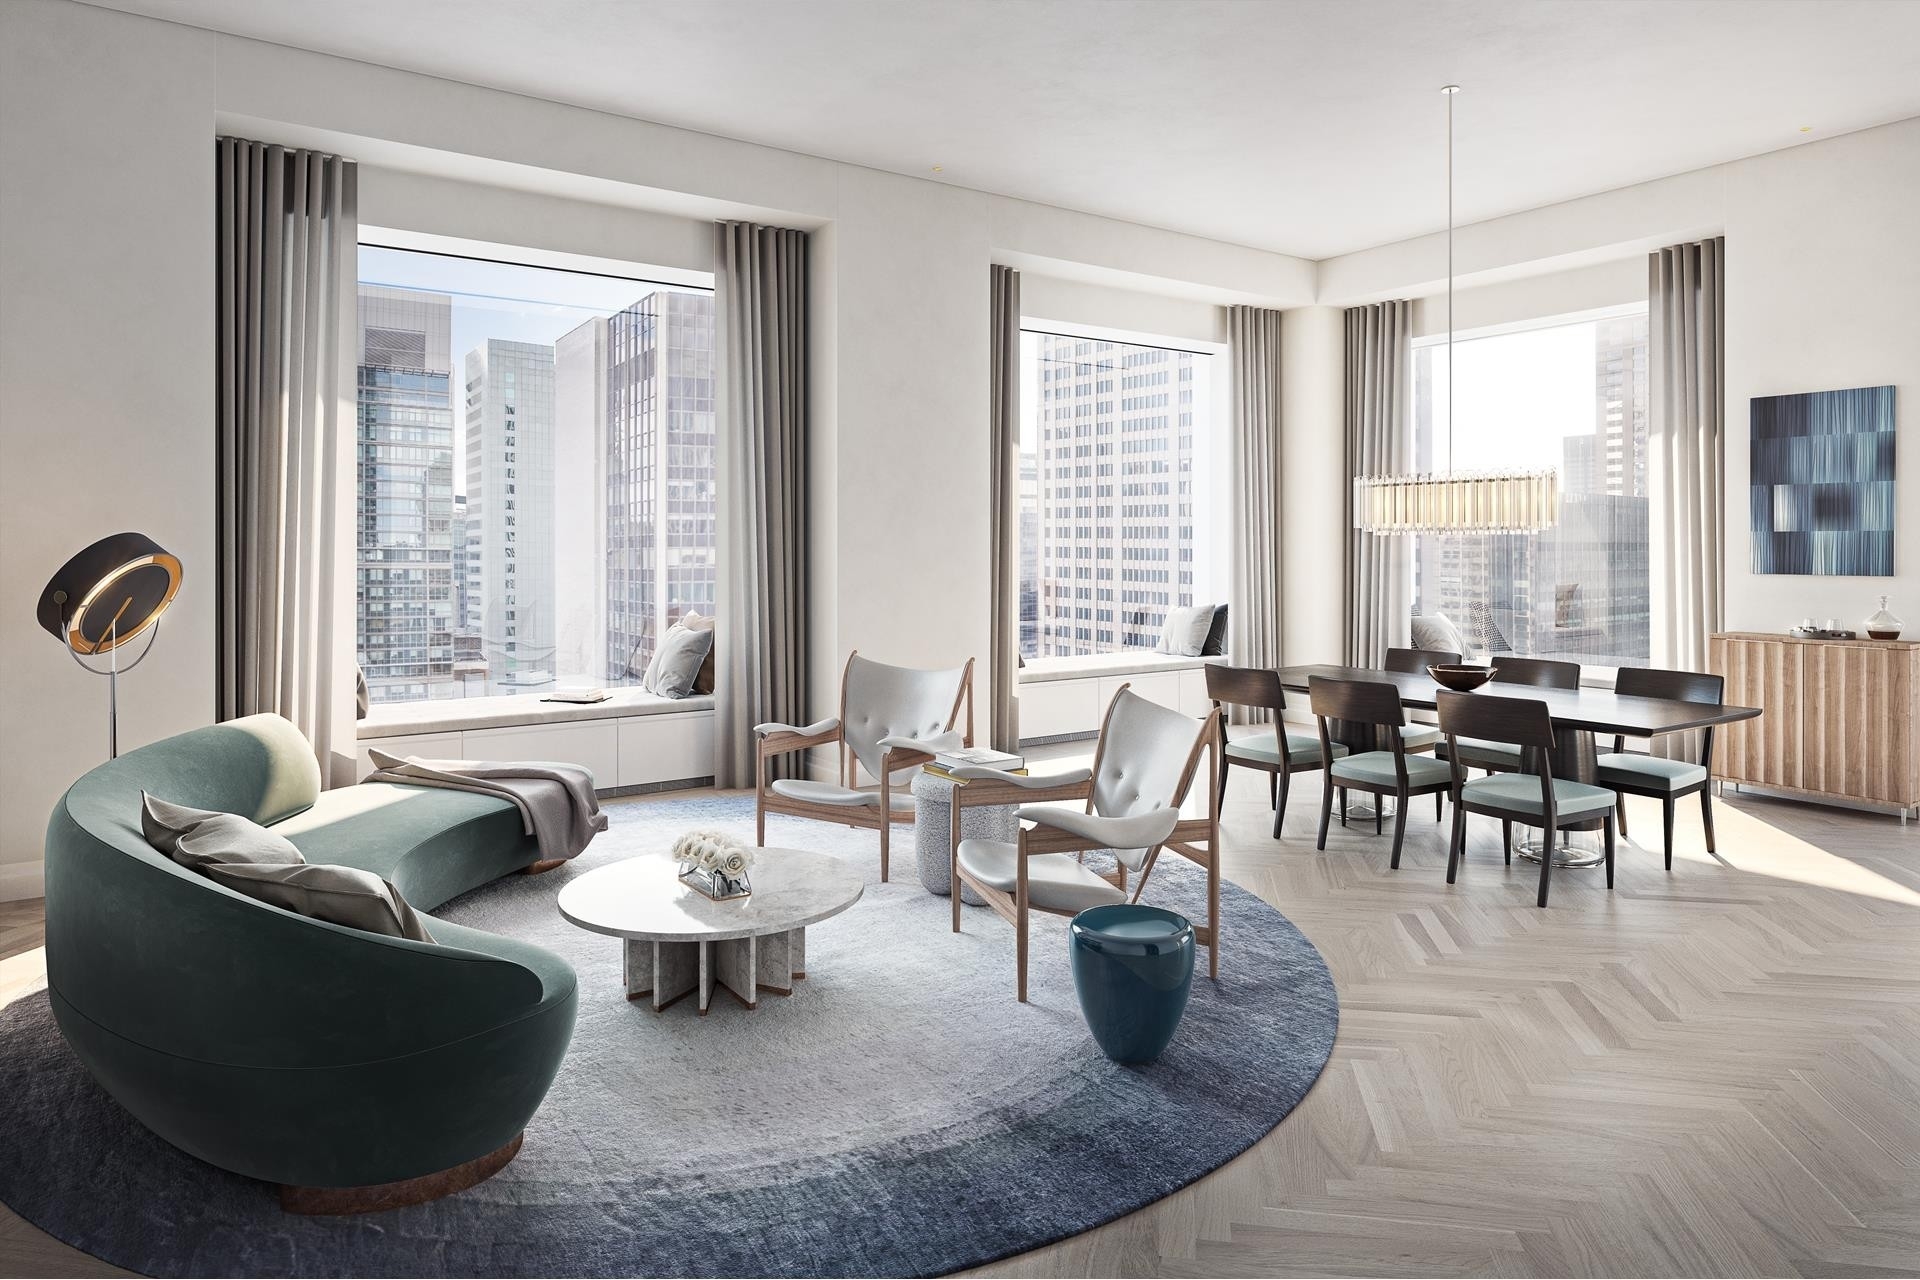 Property at 432 PARK AVE , 29E Midtown East, New York, NY 10022